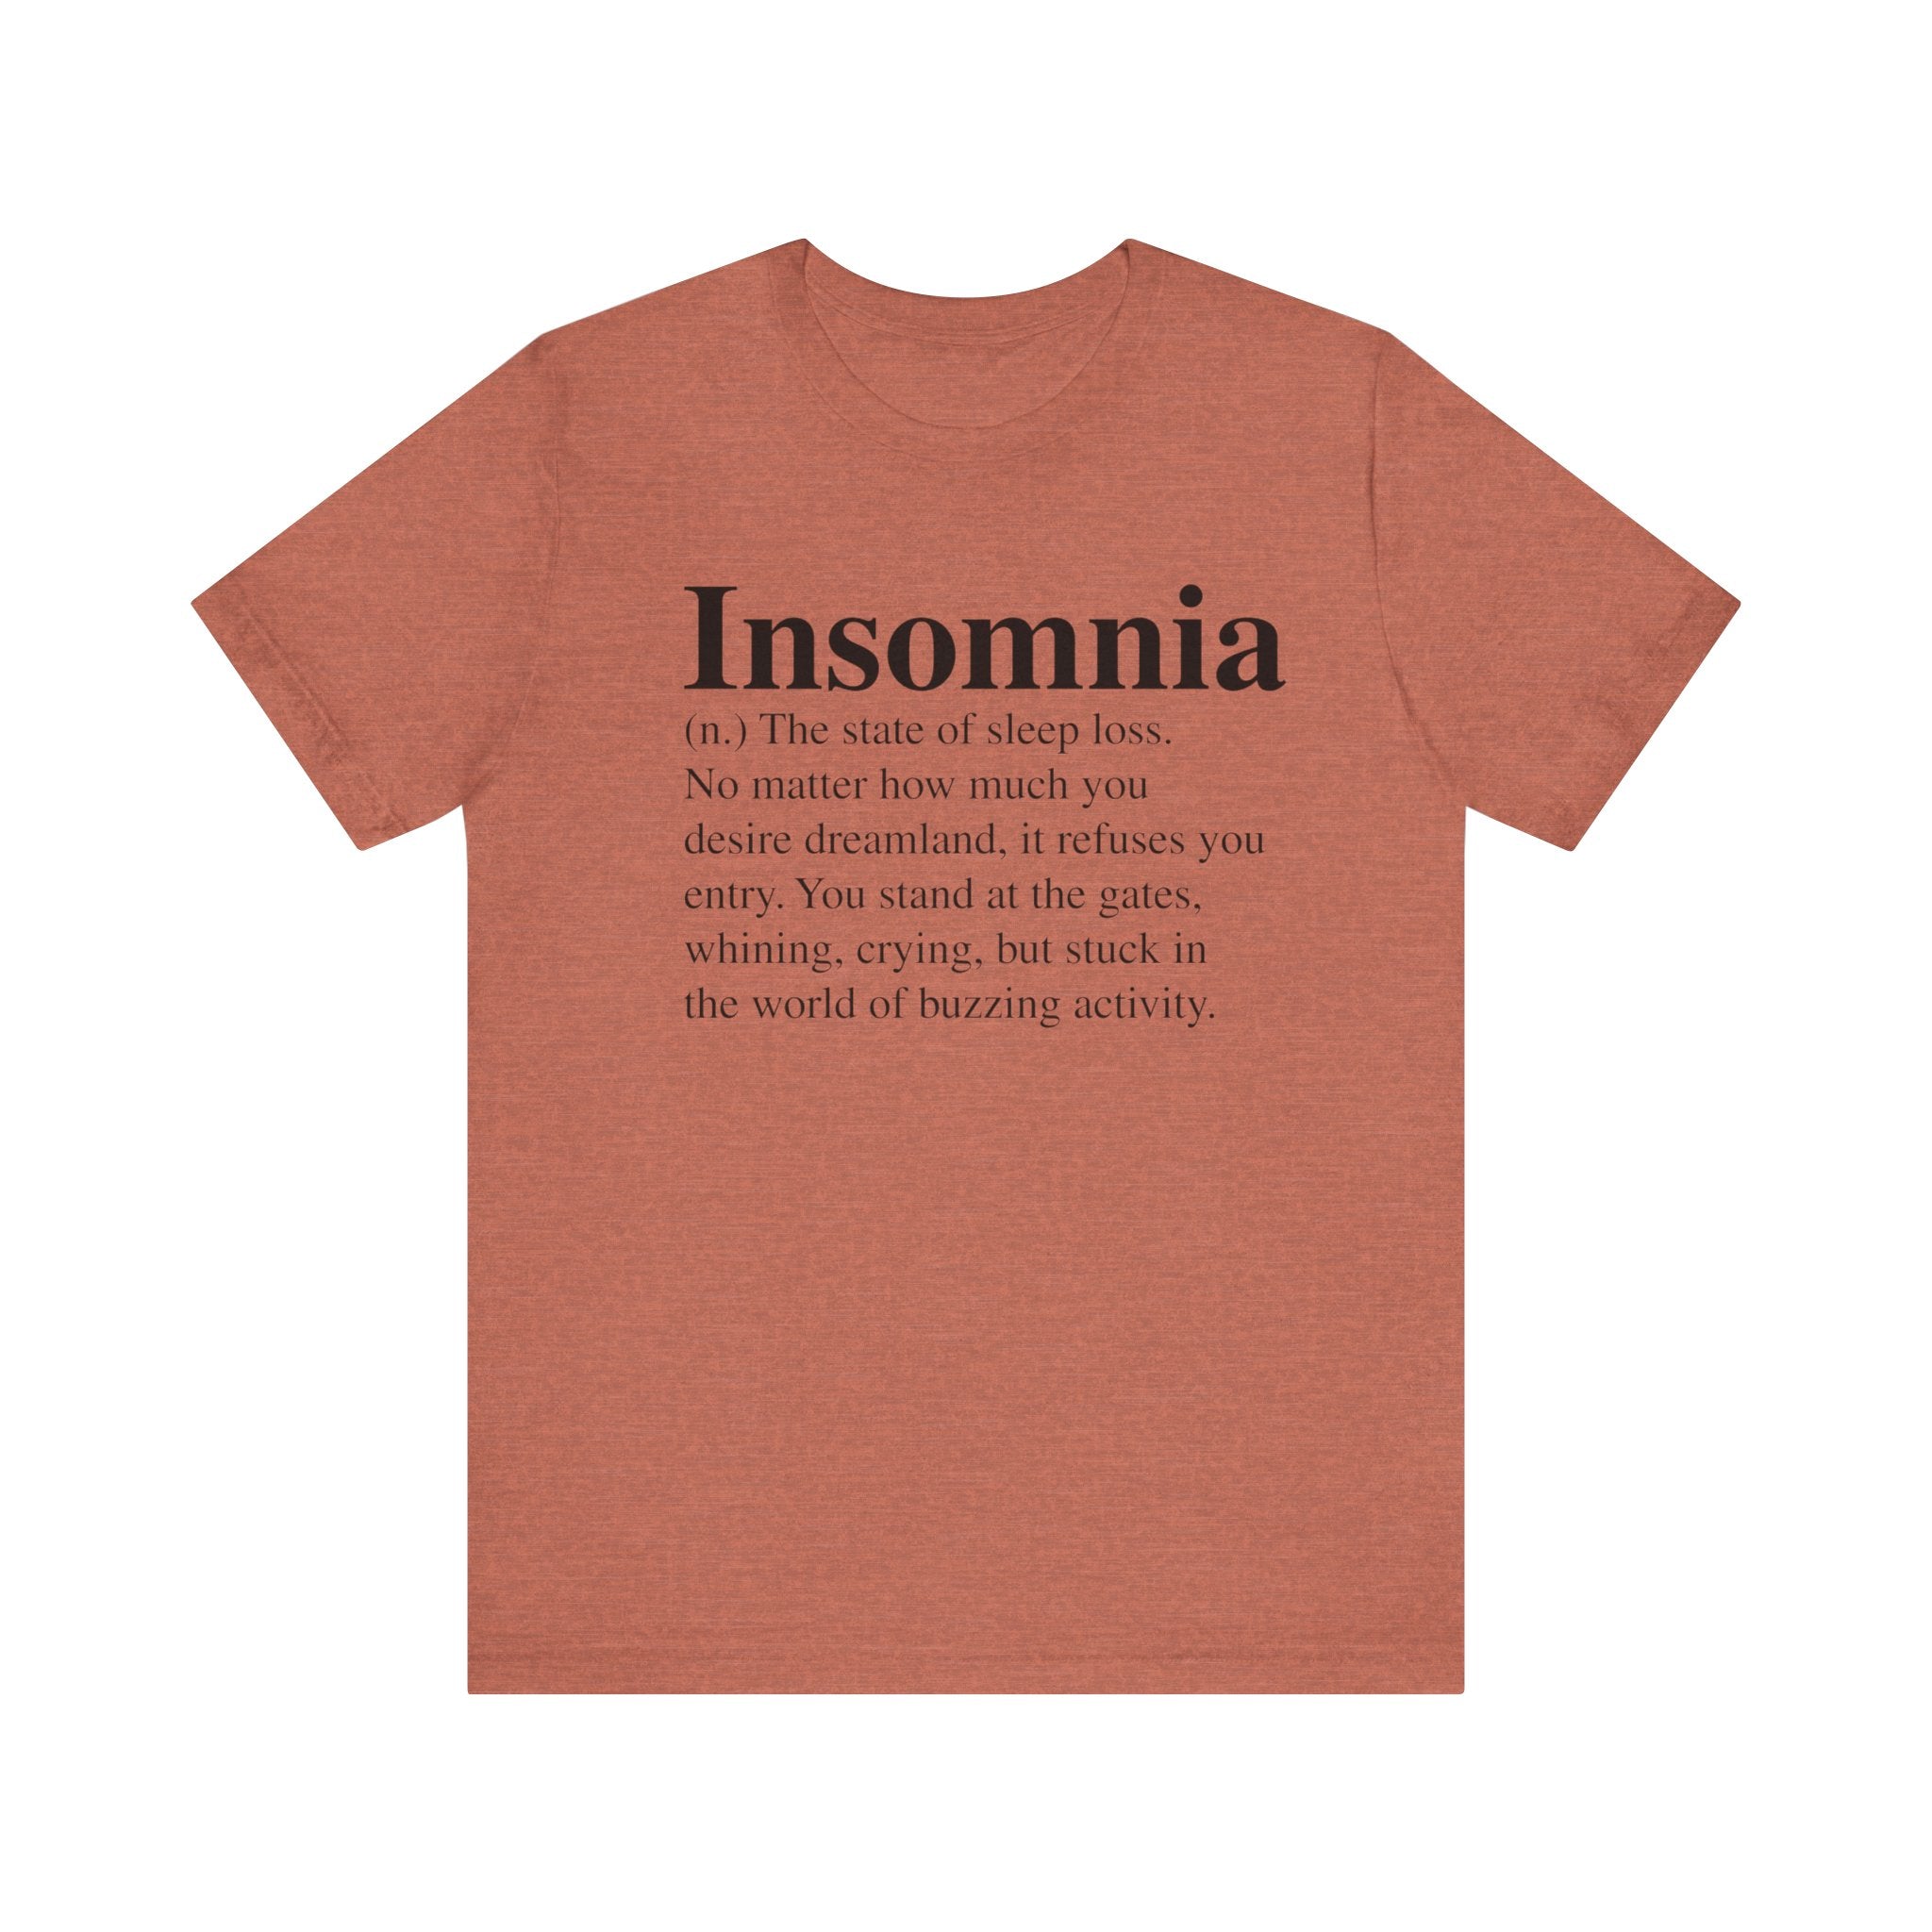 A terracotta-colored soft cotton Insomnia T-Shirt with the word "insomnia" and its definition printed in a contrasting white font.